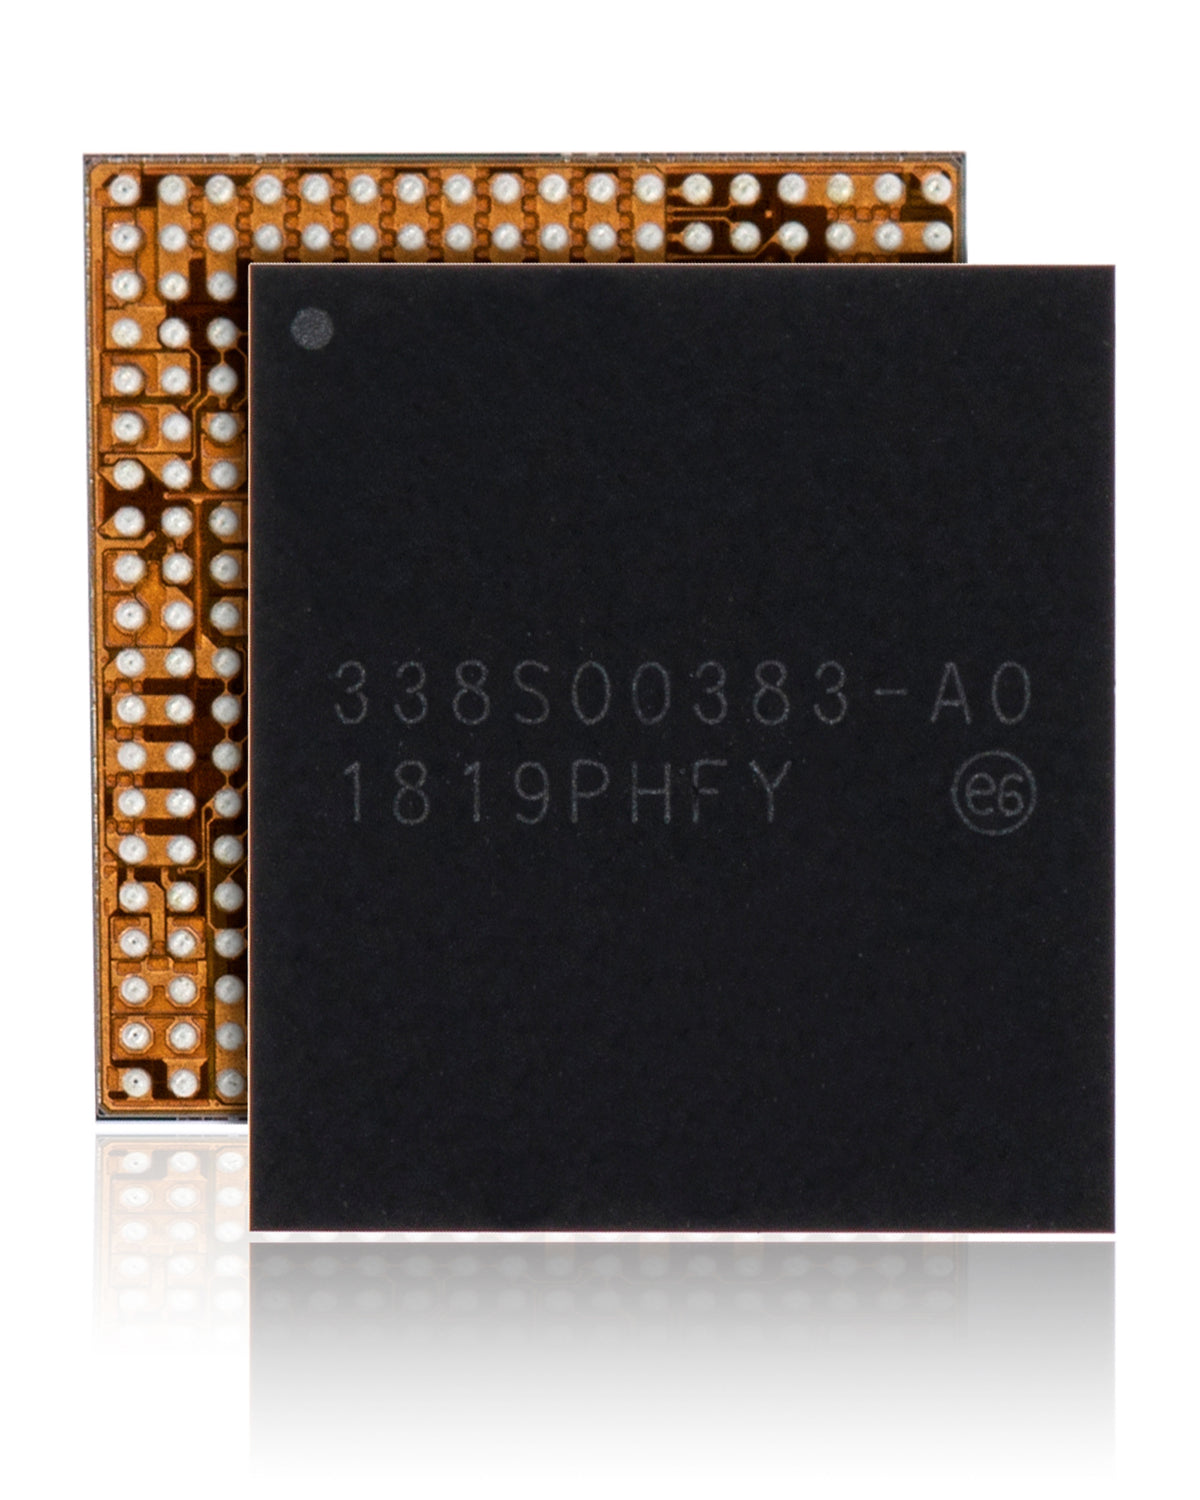 BIG POWER IC COMPATIBLE WITH IPHONE XS / XR (338S00383-A0)